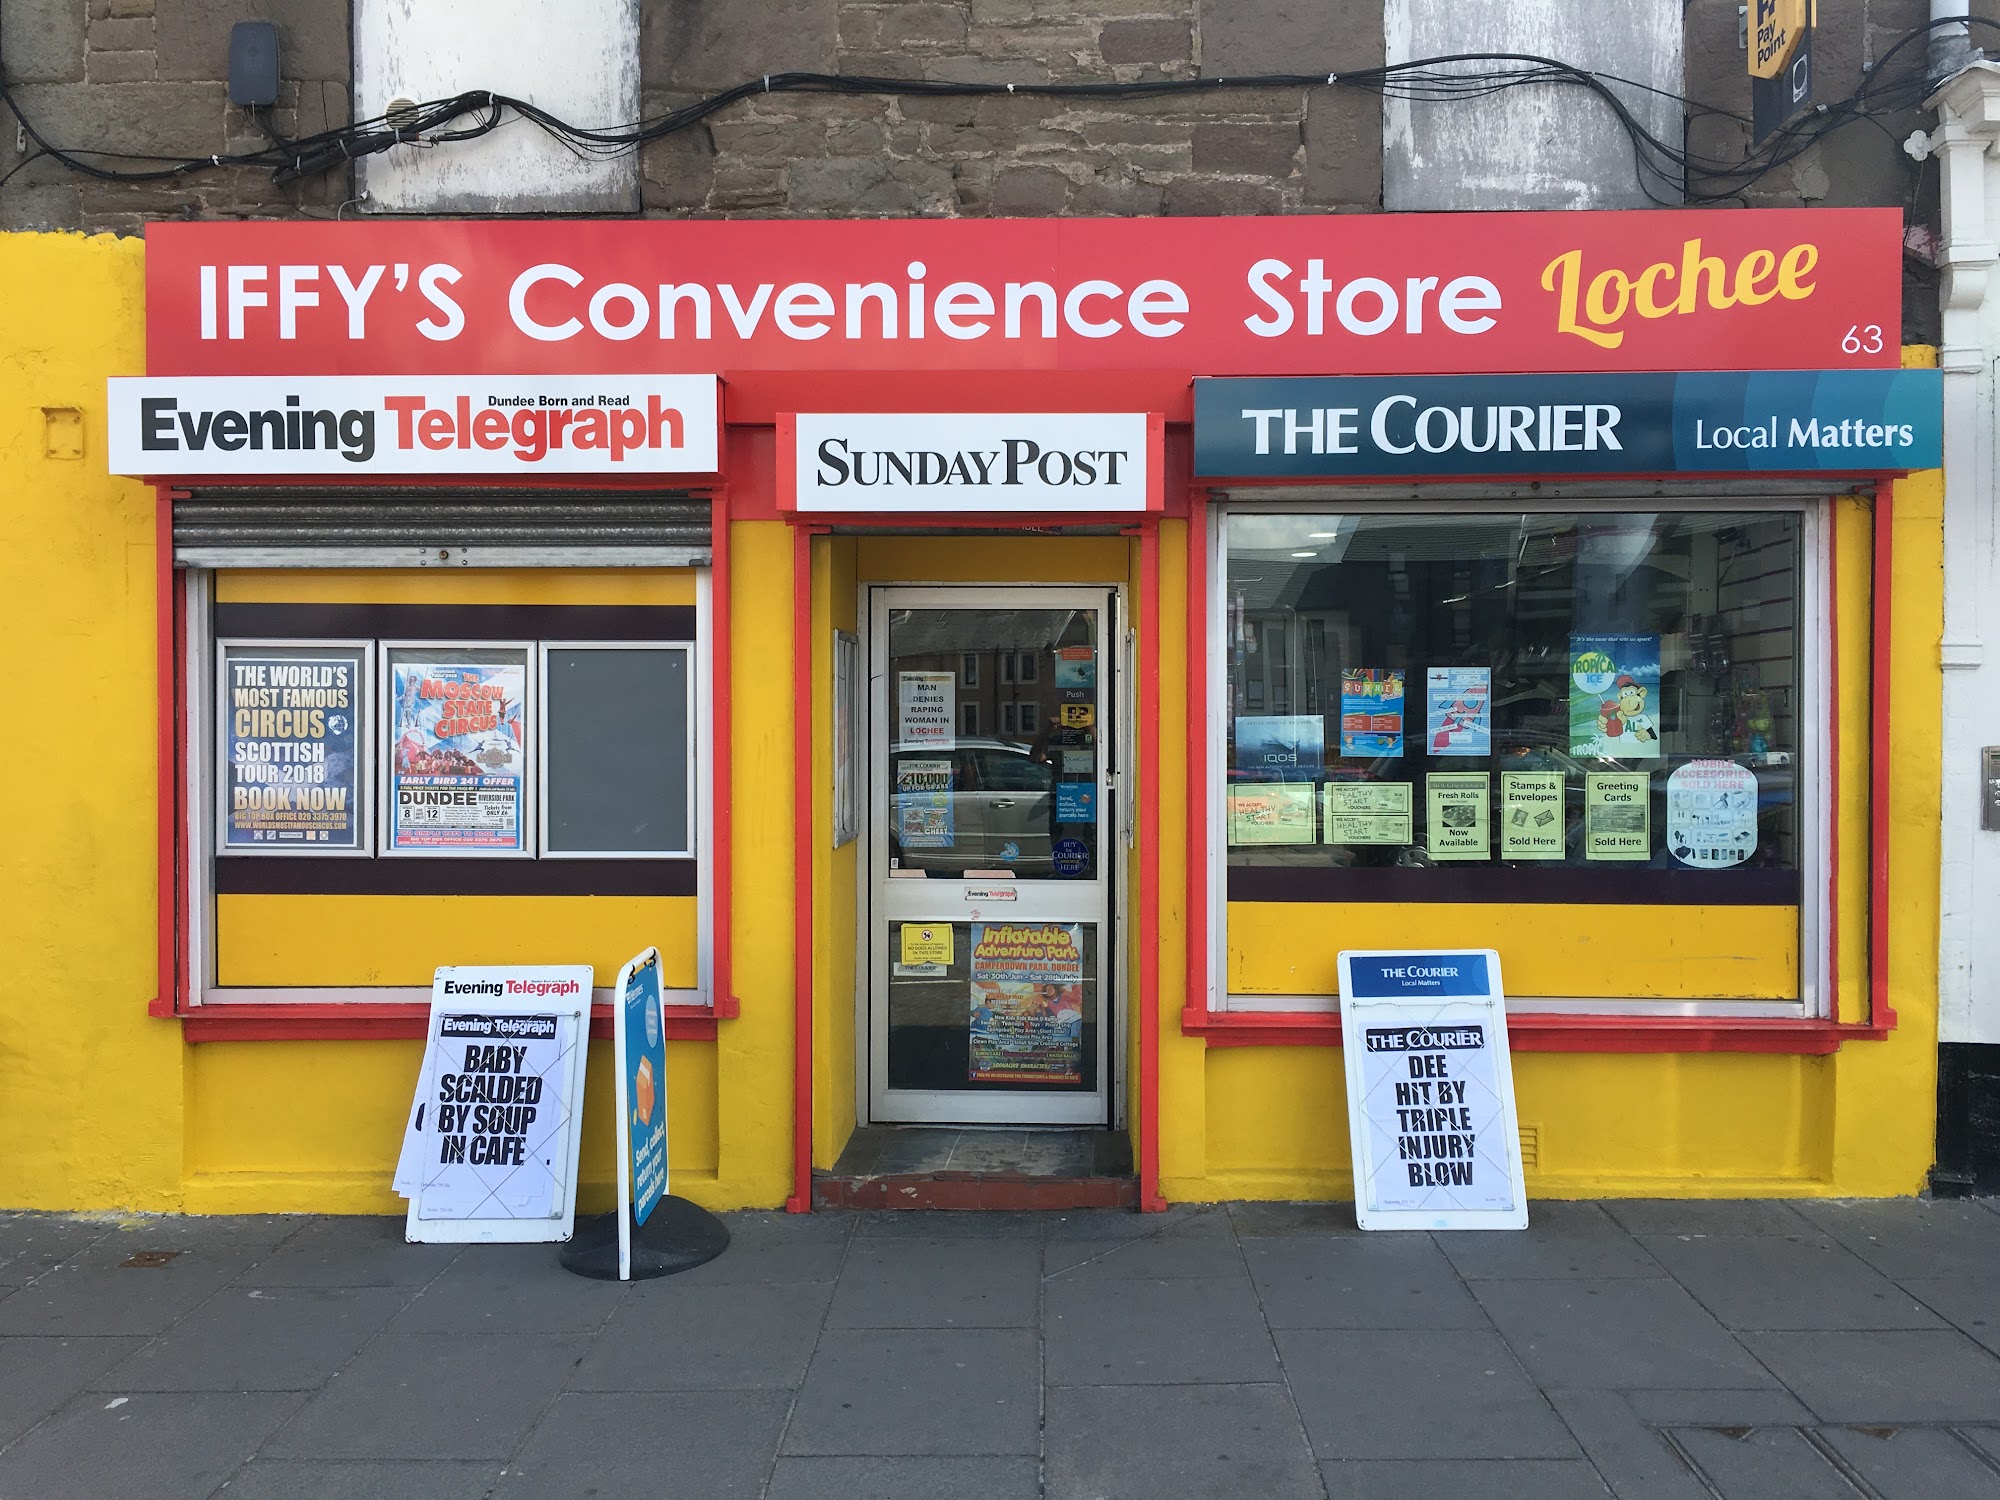 Iffy's Convenience Store